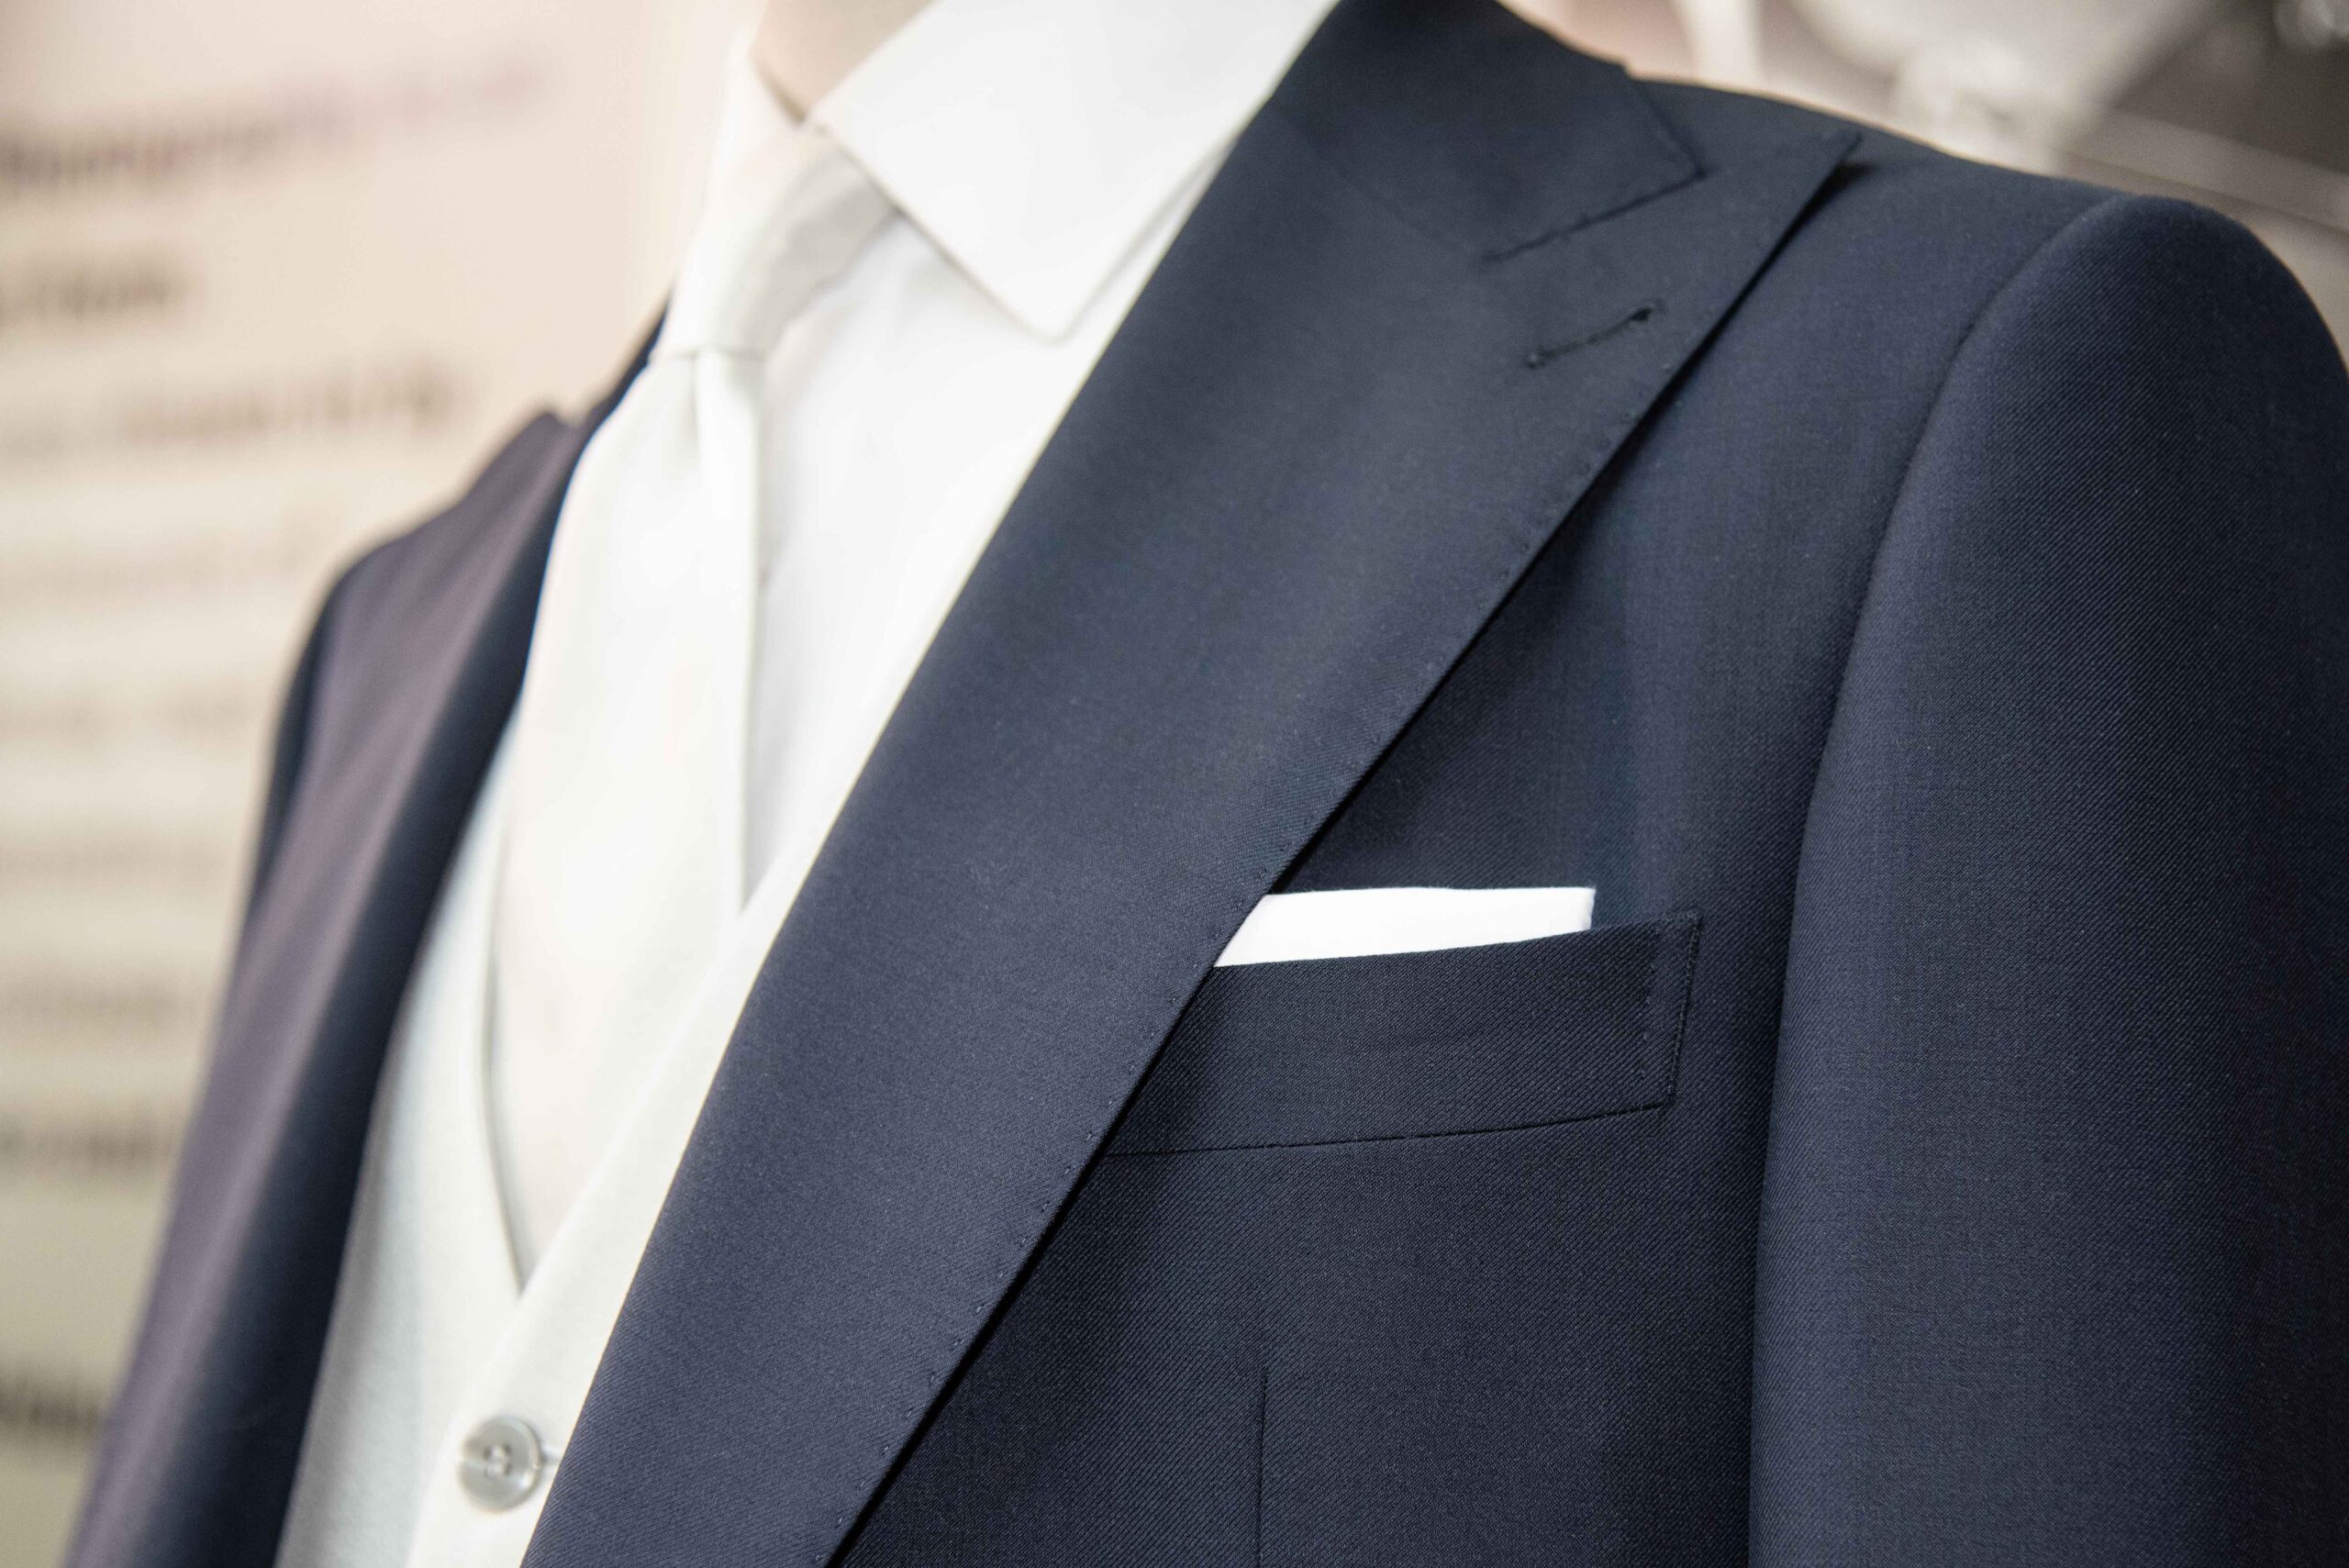 Sartorial details of the shirt: what's the placket